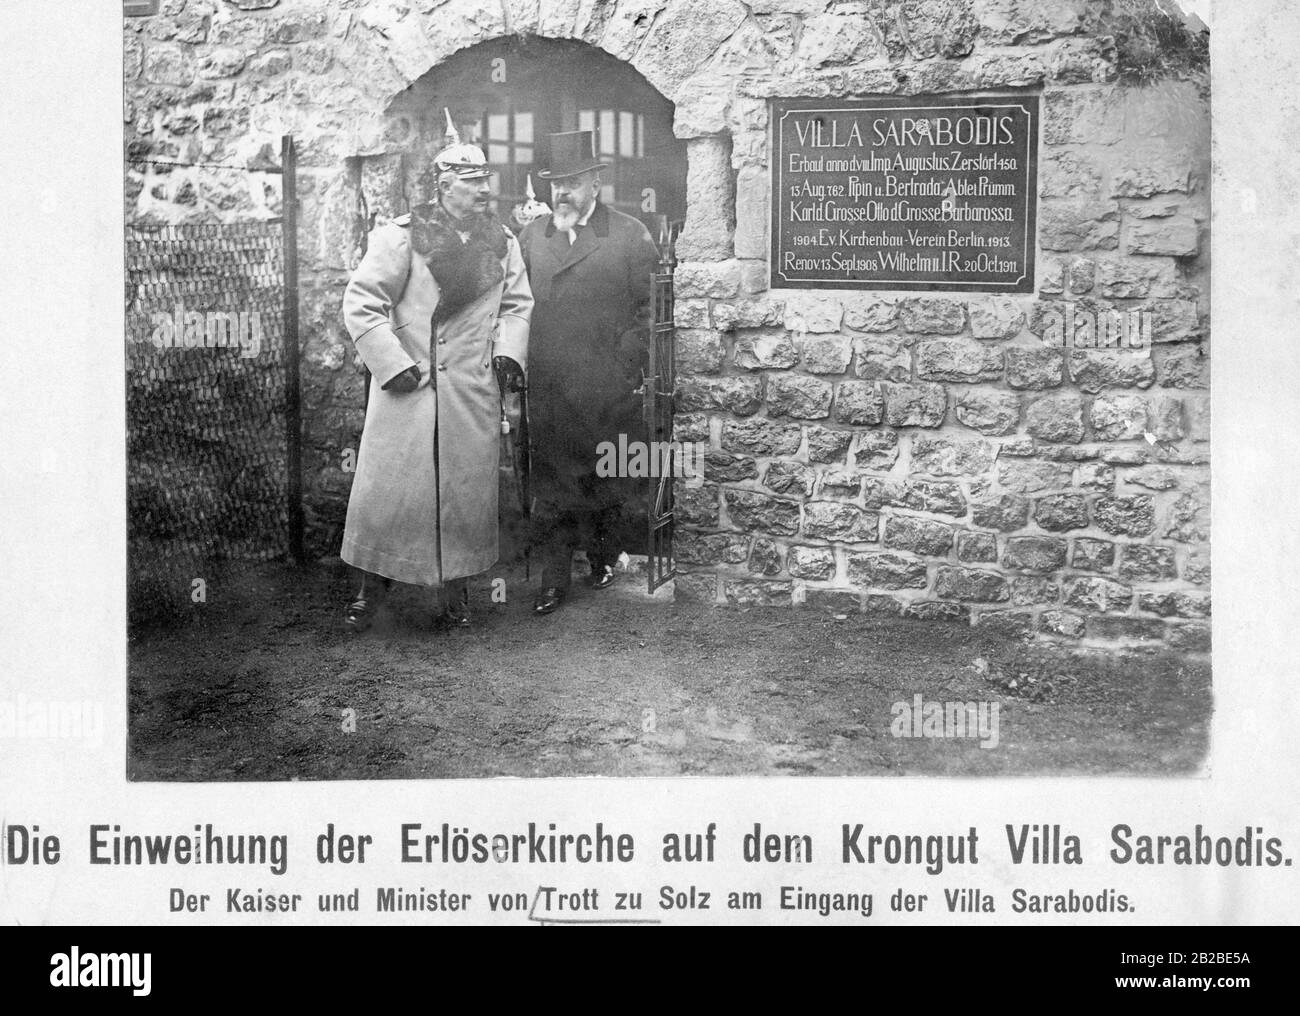 Kaiser Wilhelm II (left) leaves Villa Sarabodis together with the Minister of Culture August von Trott zu Solz. On October 15, 1913, the Church of the Redeemer was inaugurated on the then crown estate Villa Sarabodis in Gerolstein. Stock Photo